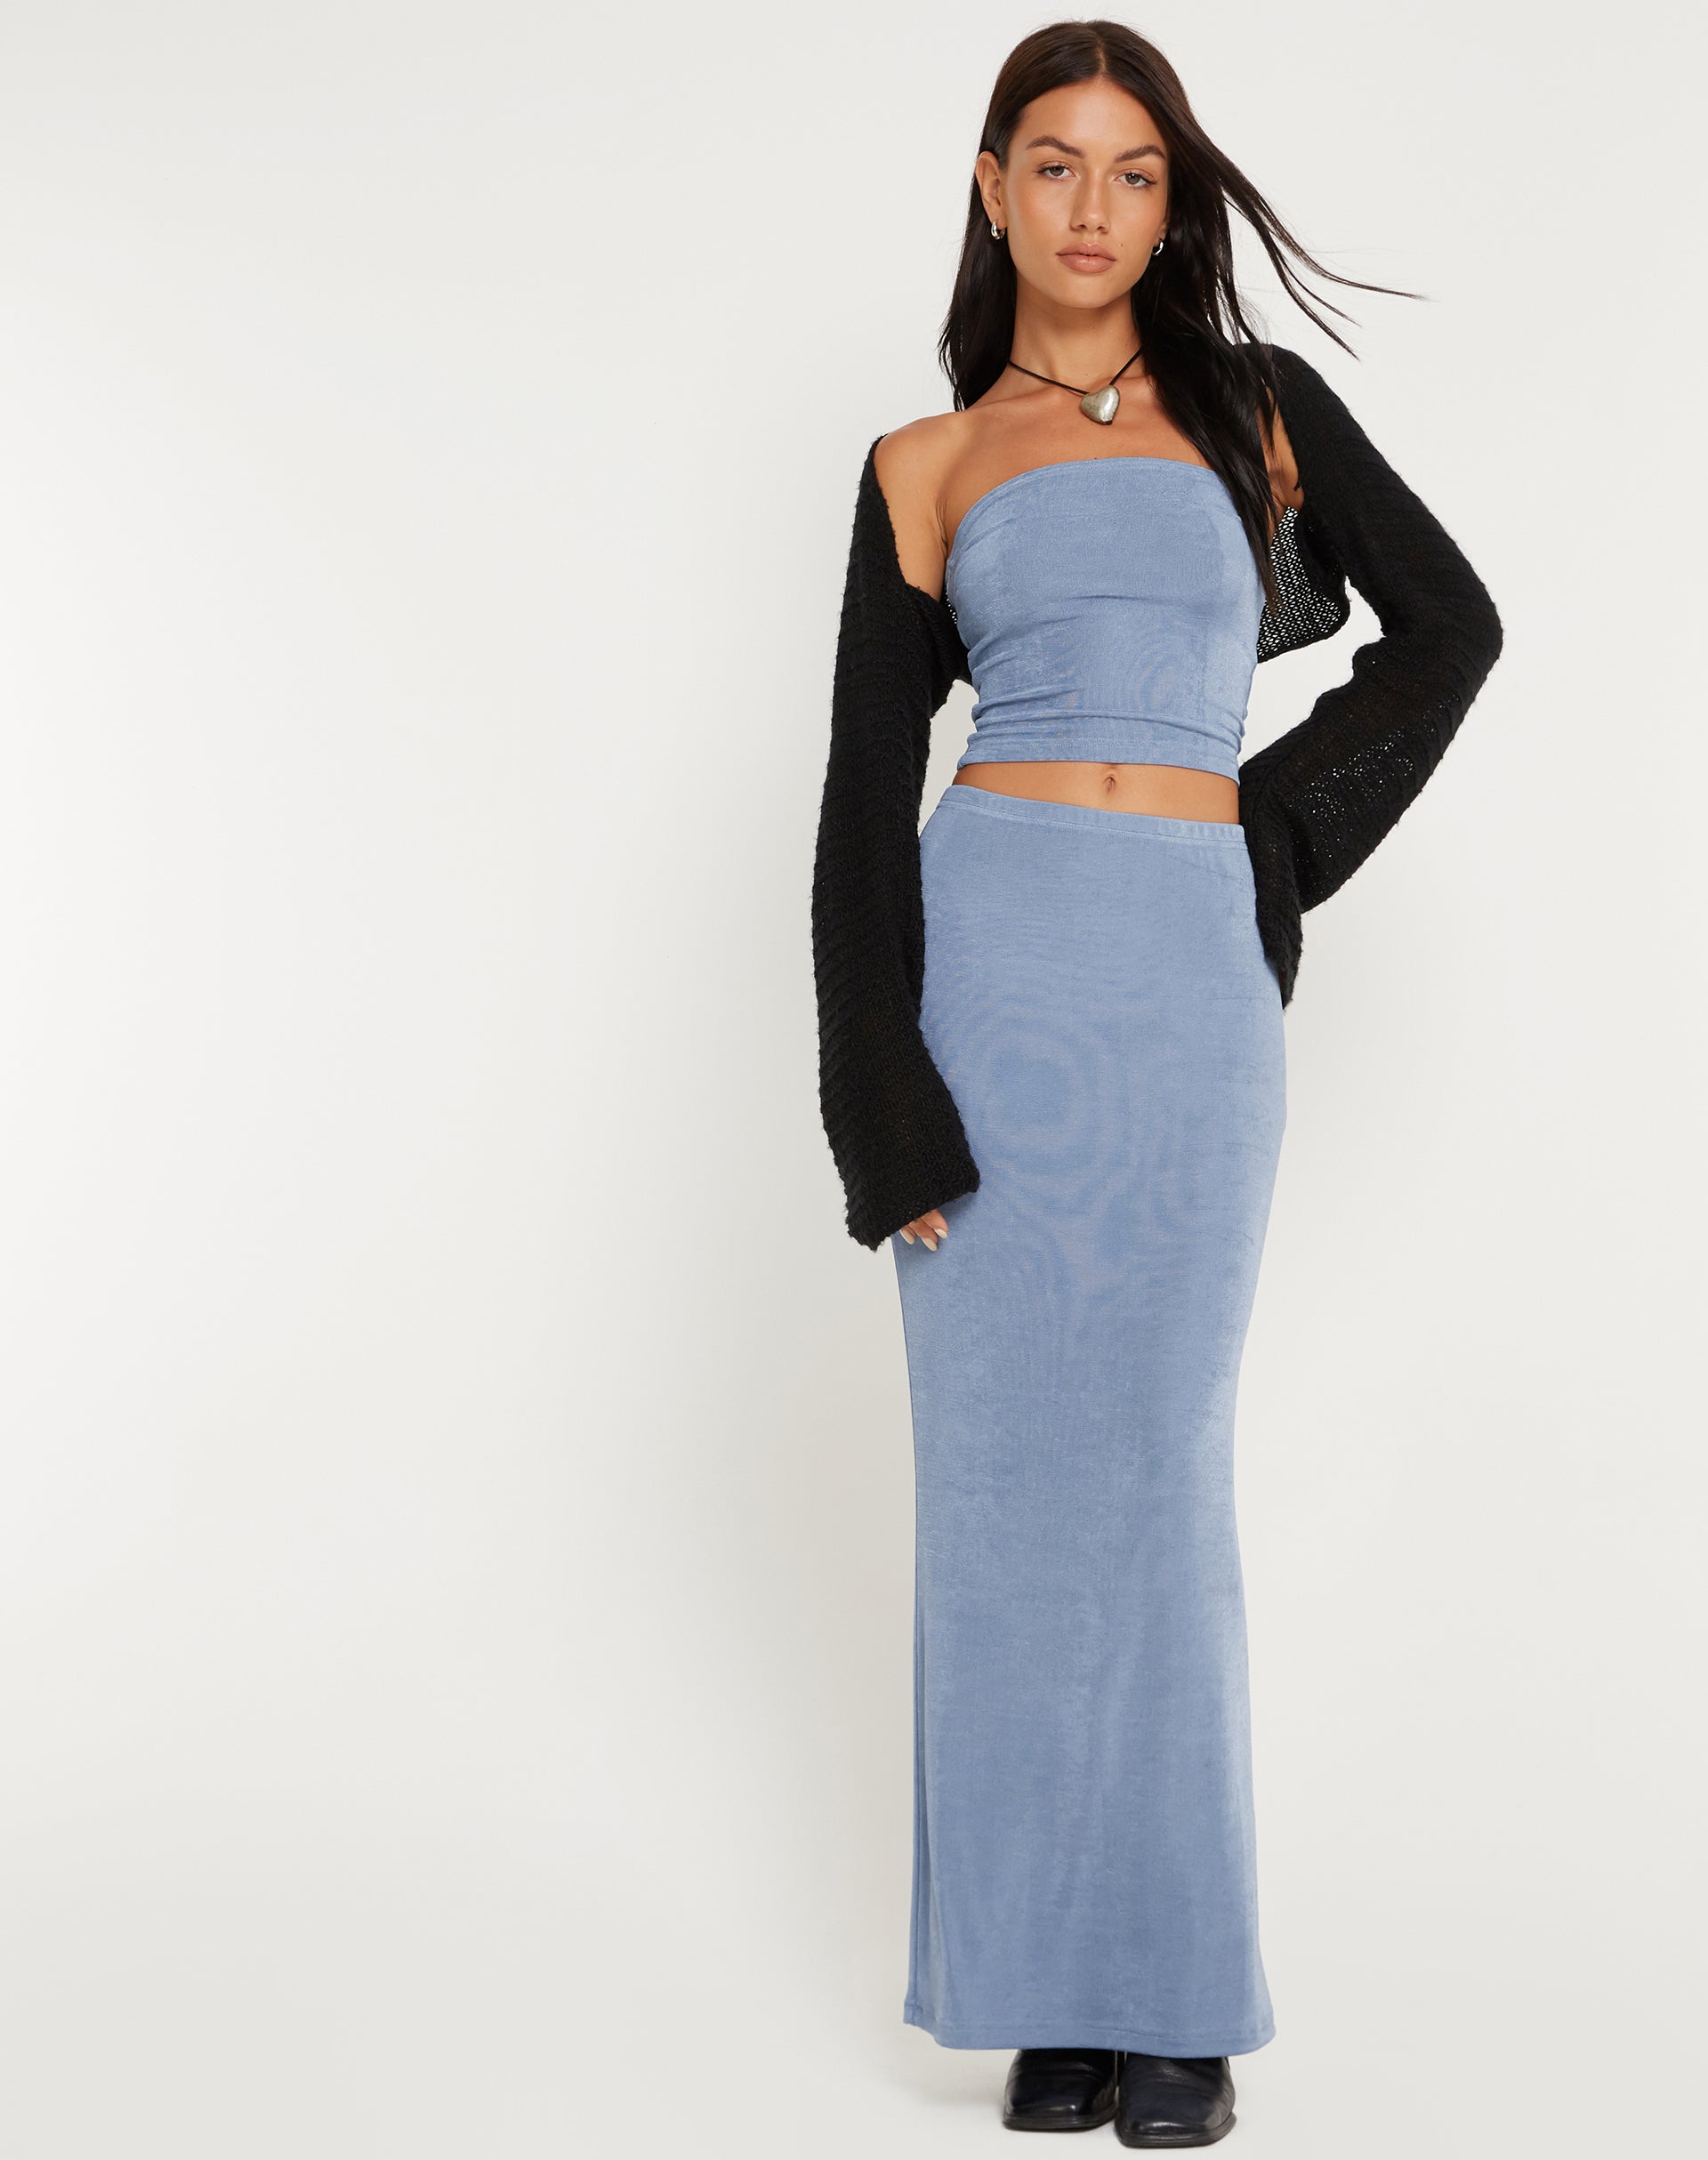 Image of New Tulus Low Rise Maxi Skirt in Slate Blue